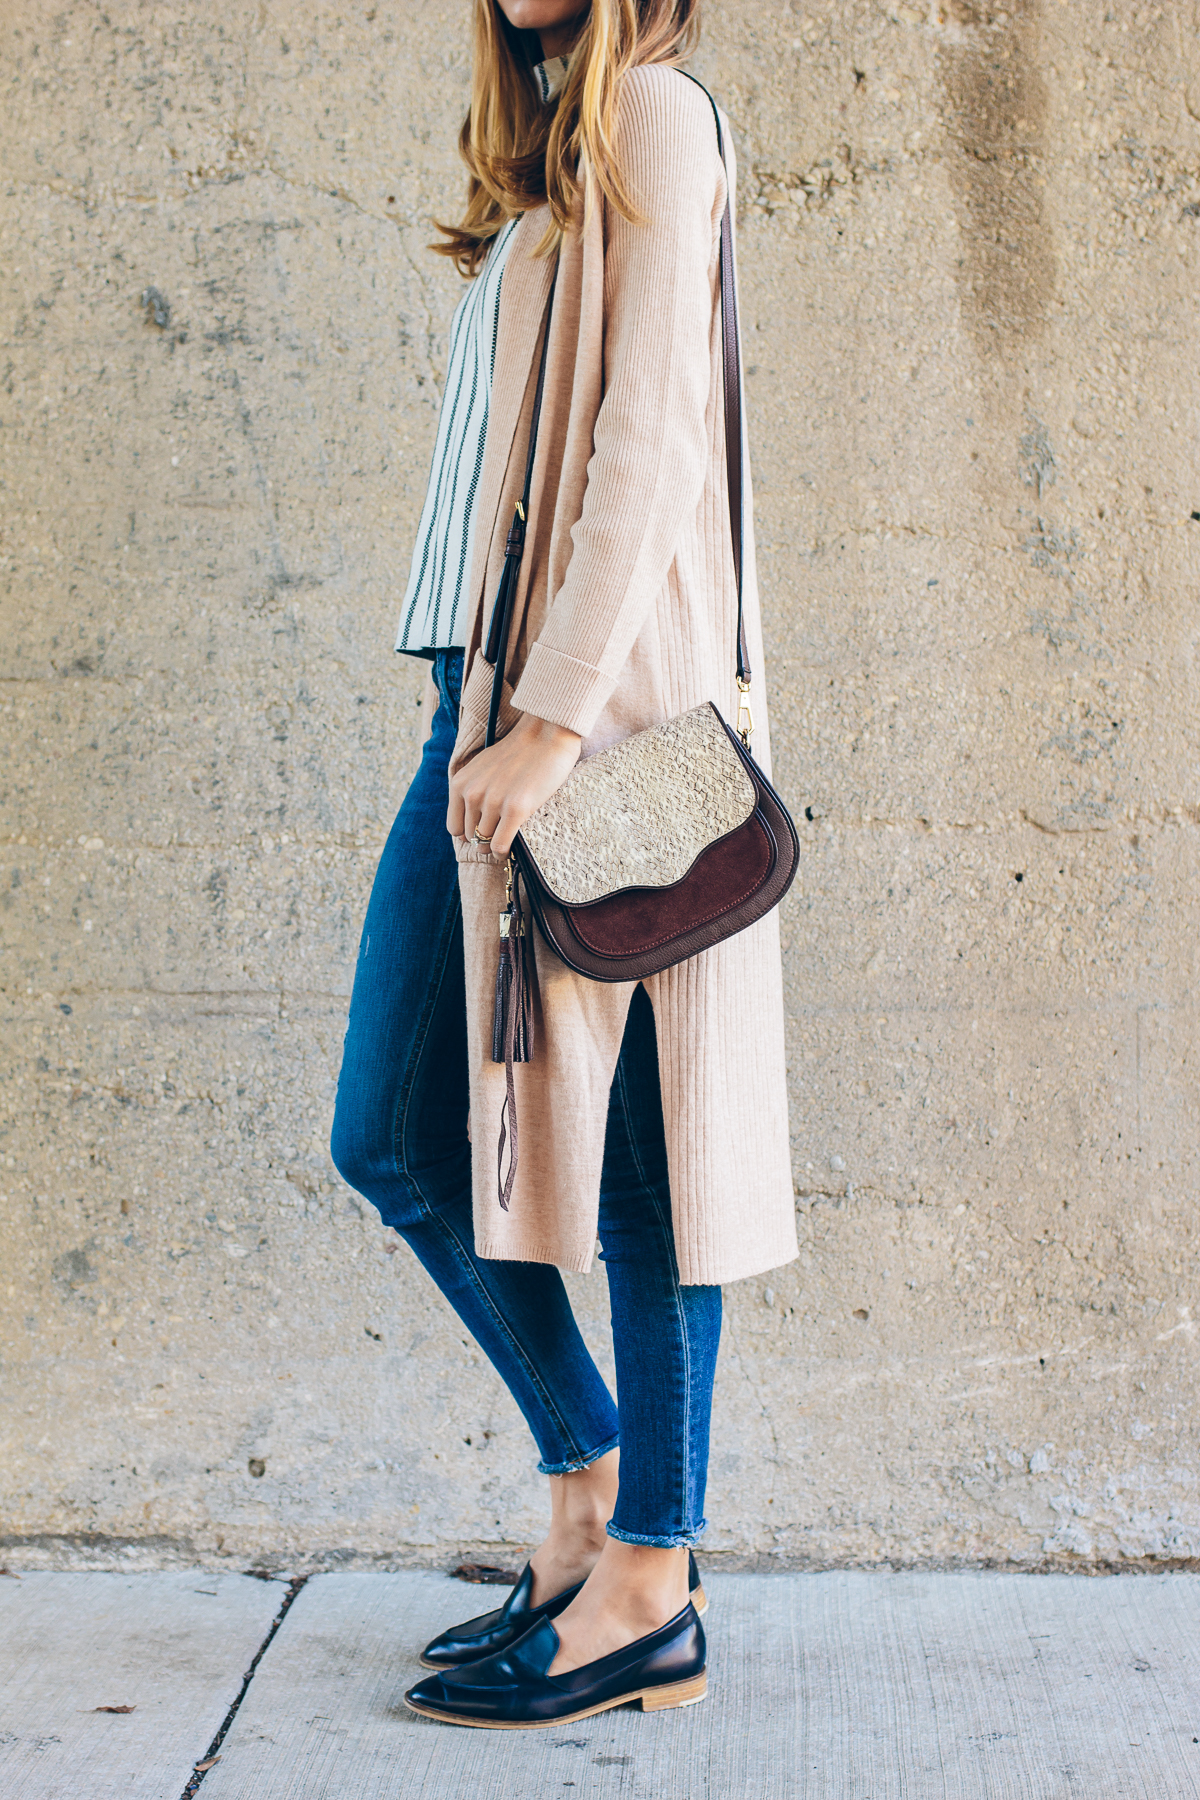 casual winter outfit, long cardigan, loafers, Rebecca Minkoff crossbody — via @TheFoxandShe